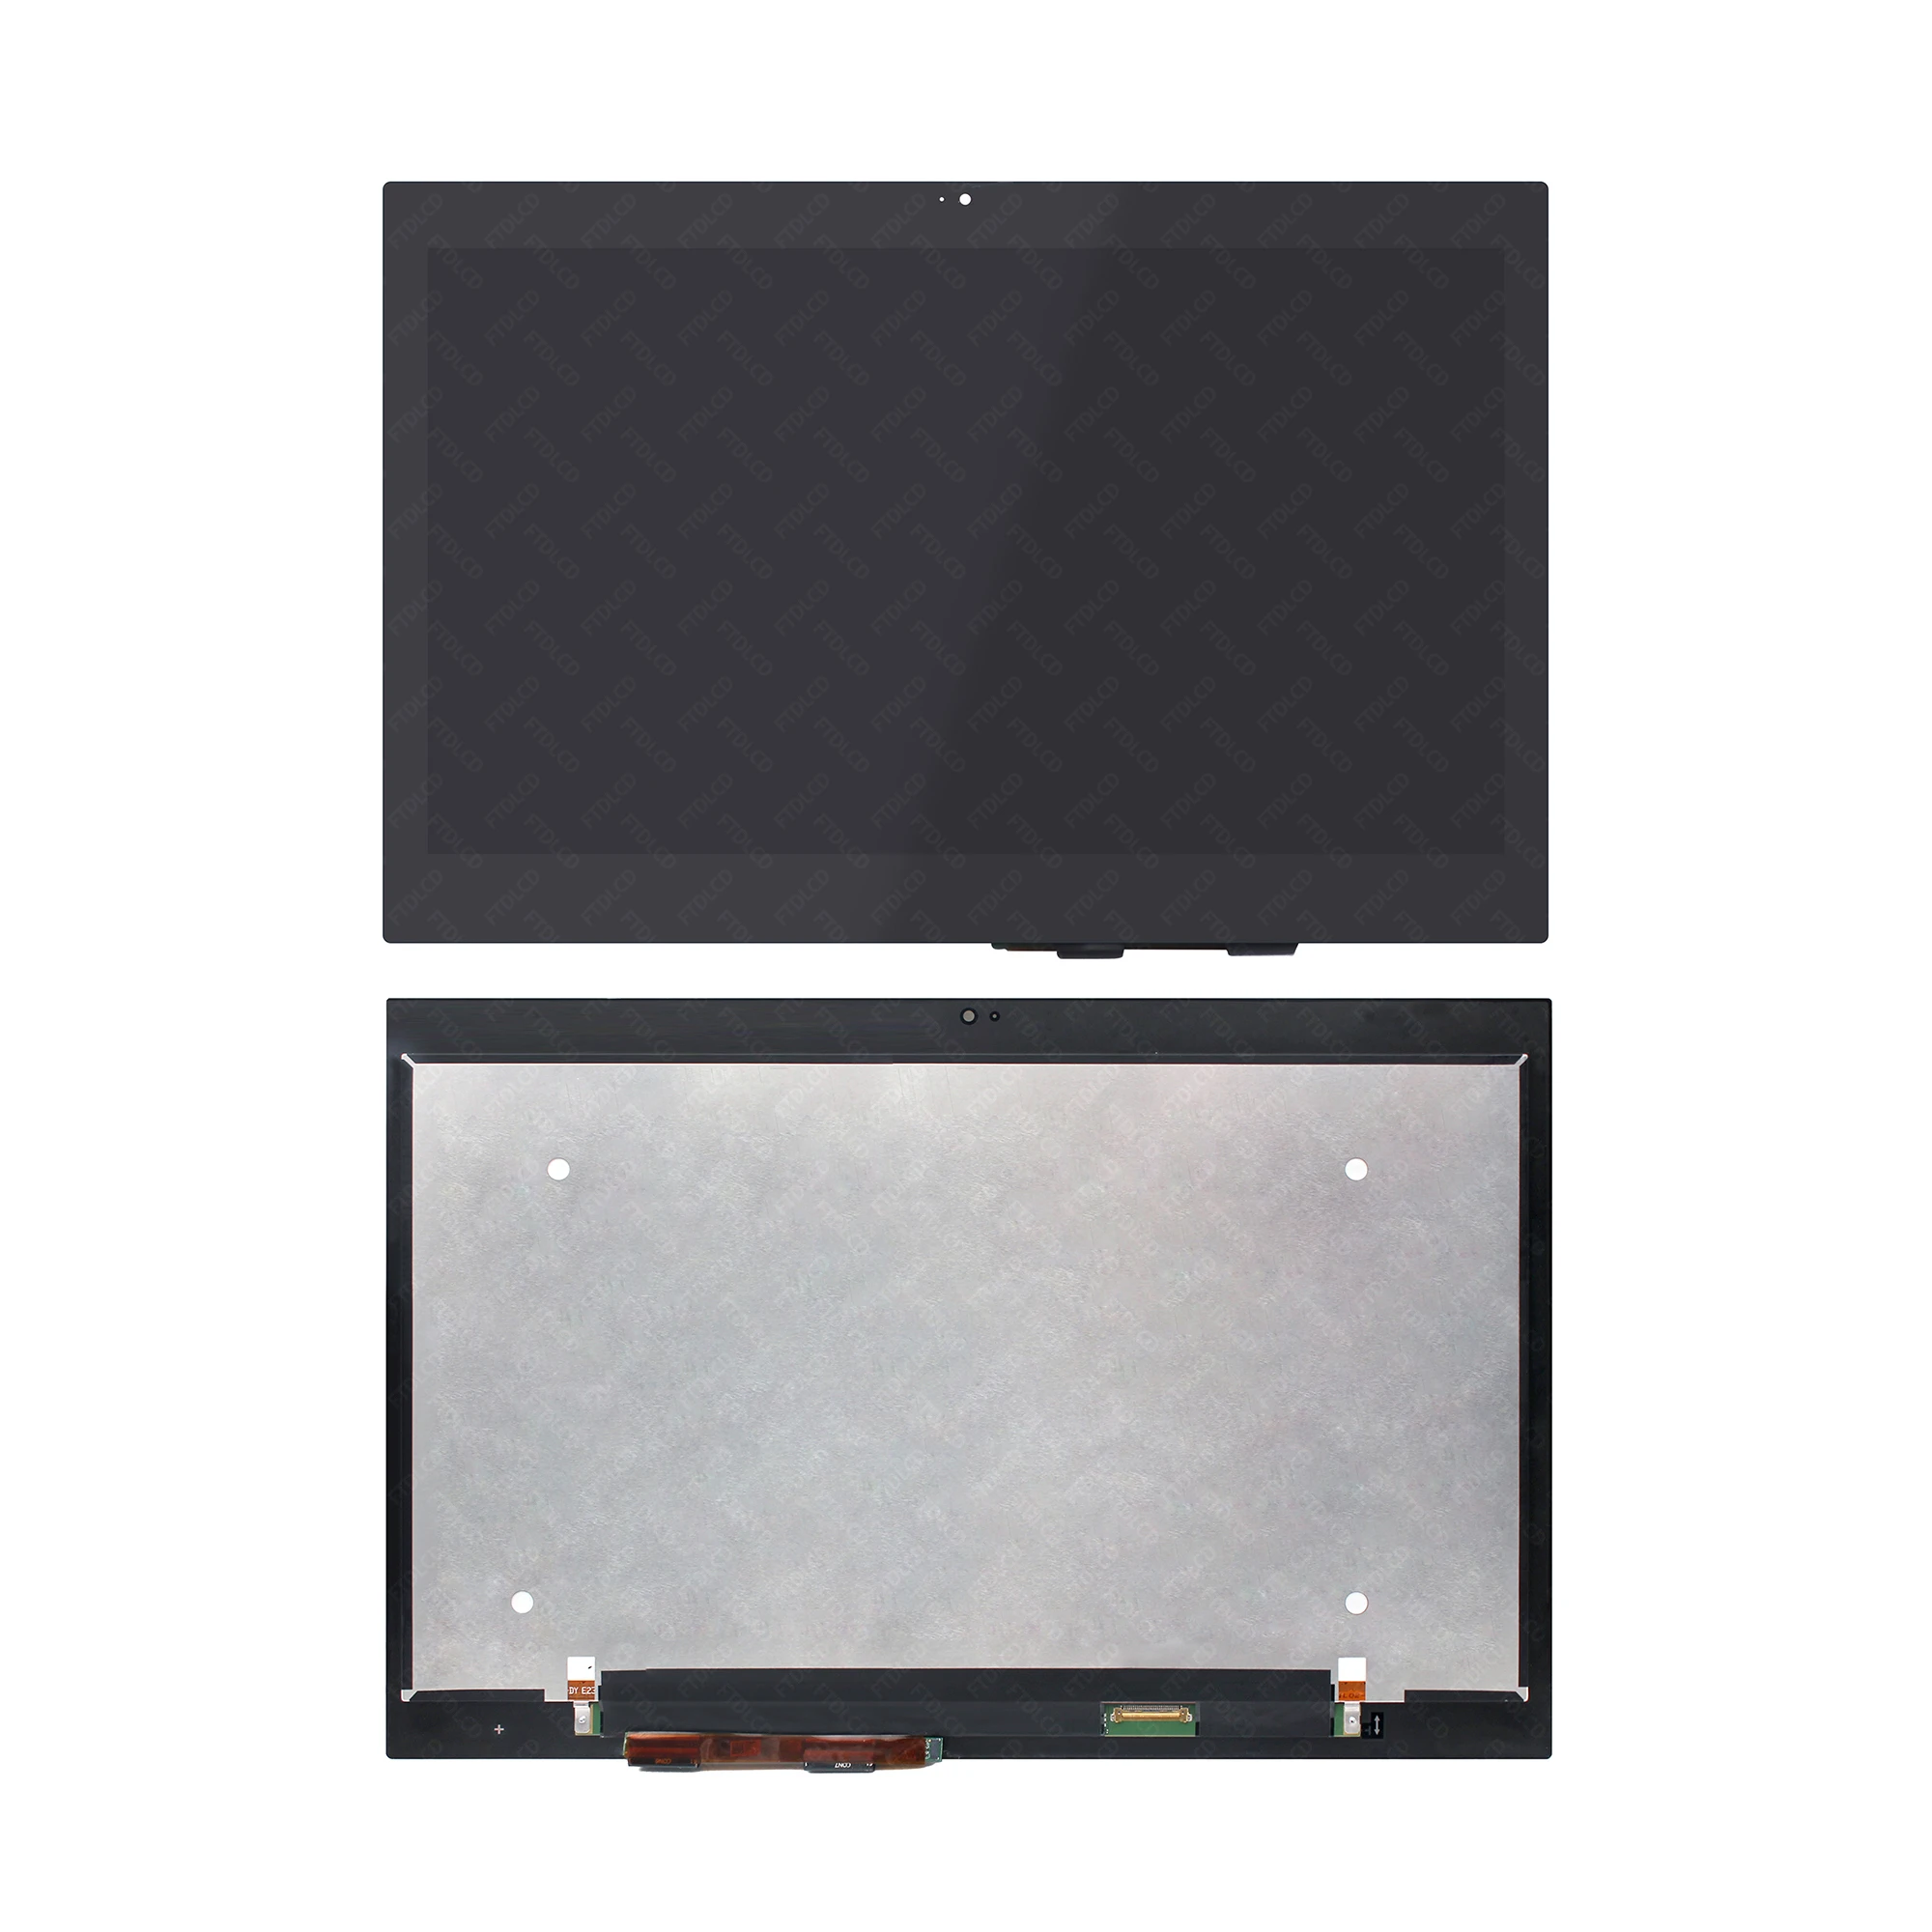 

LCD Touchscreen Digitizer Assembly for Acer Spin 5 SP513-52N-3978 SP513-52N-8326 SP513-52N-33SN SP513-52N-88QM SP513-52N-530R